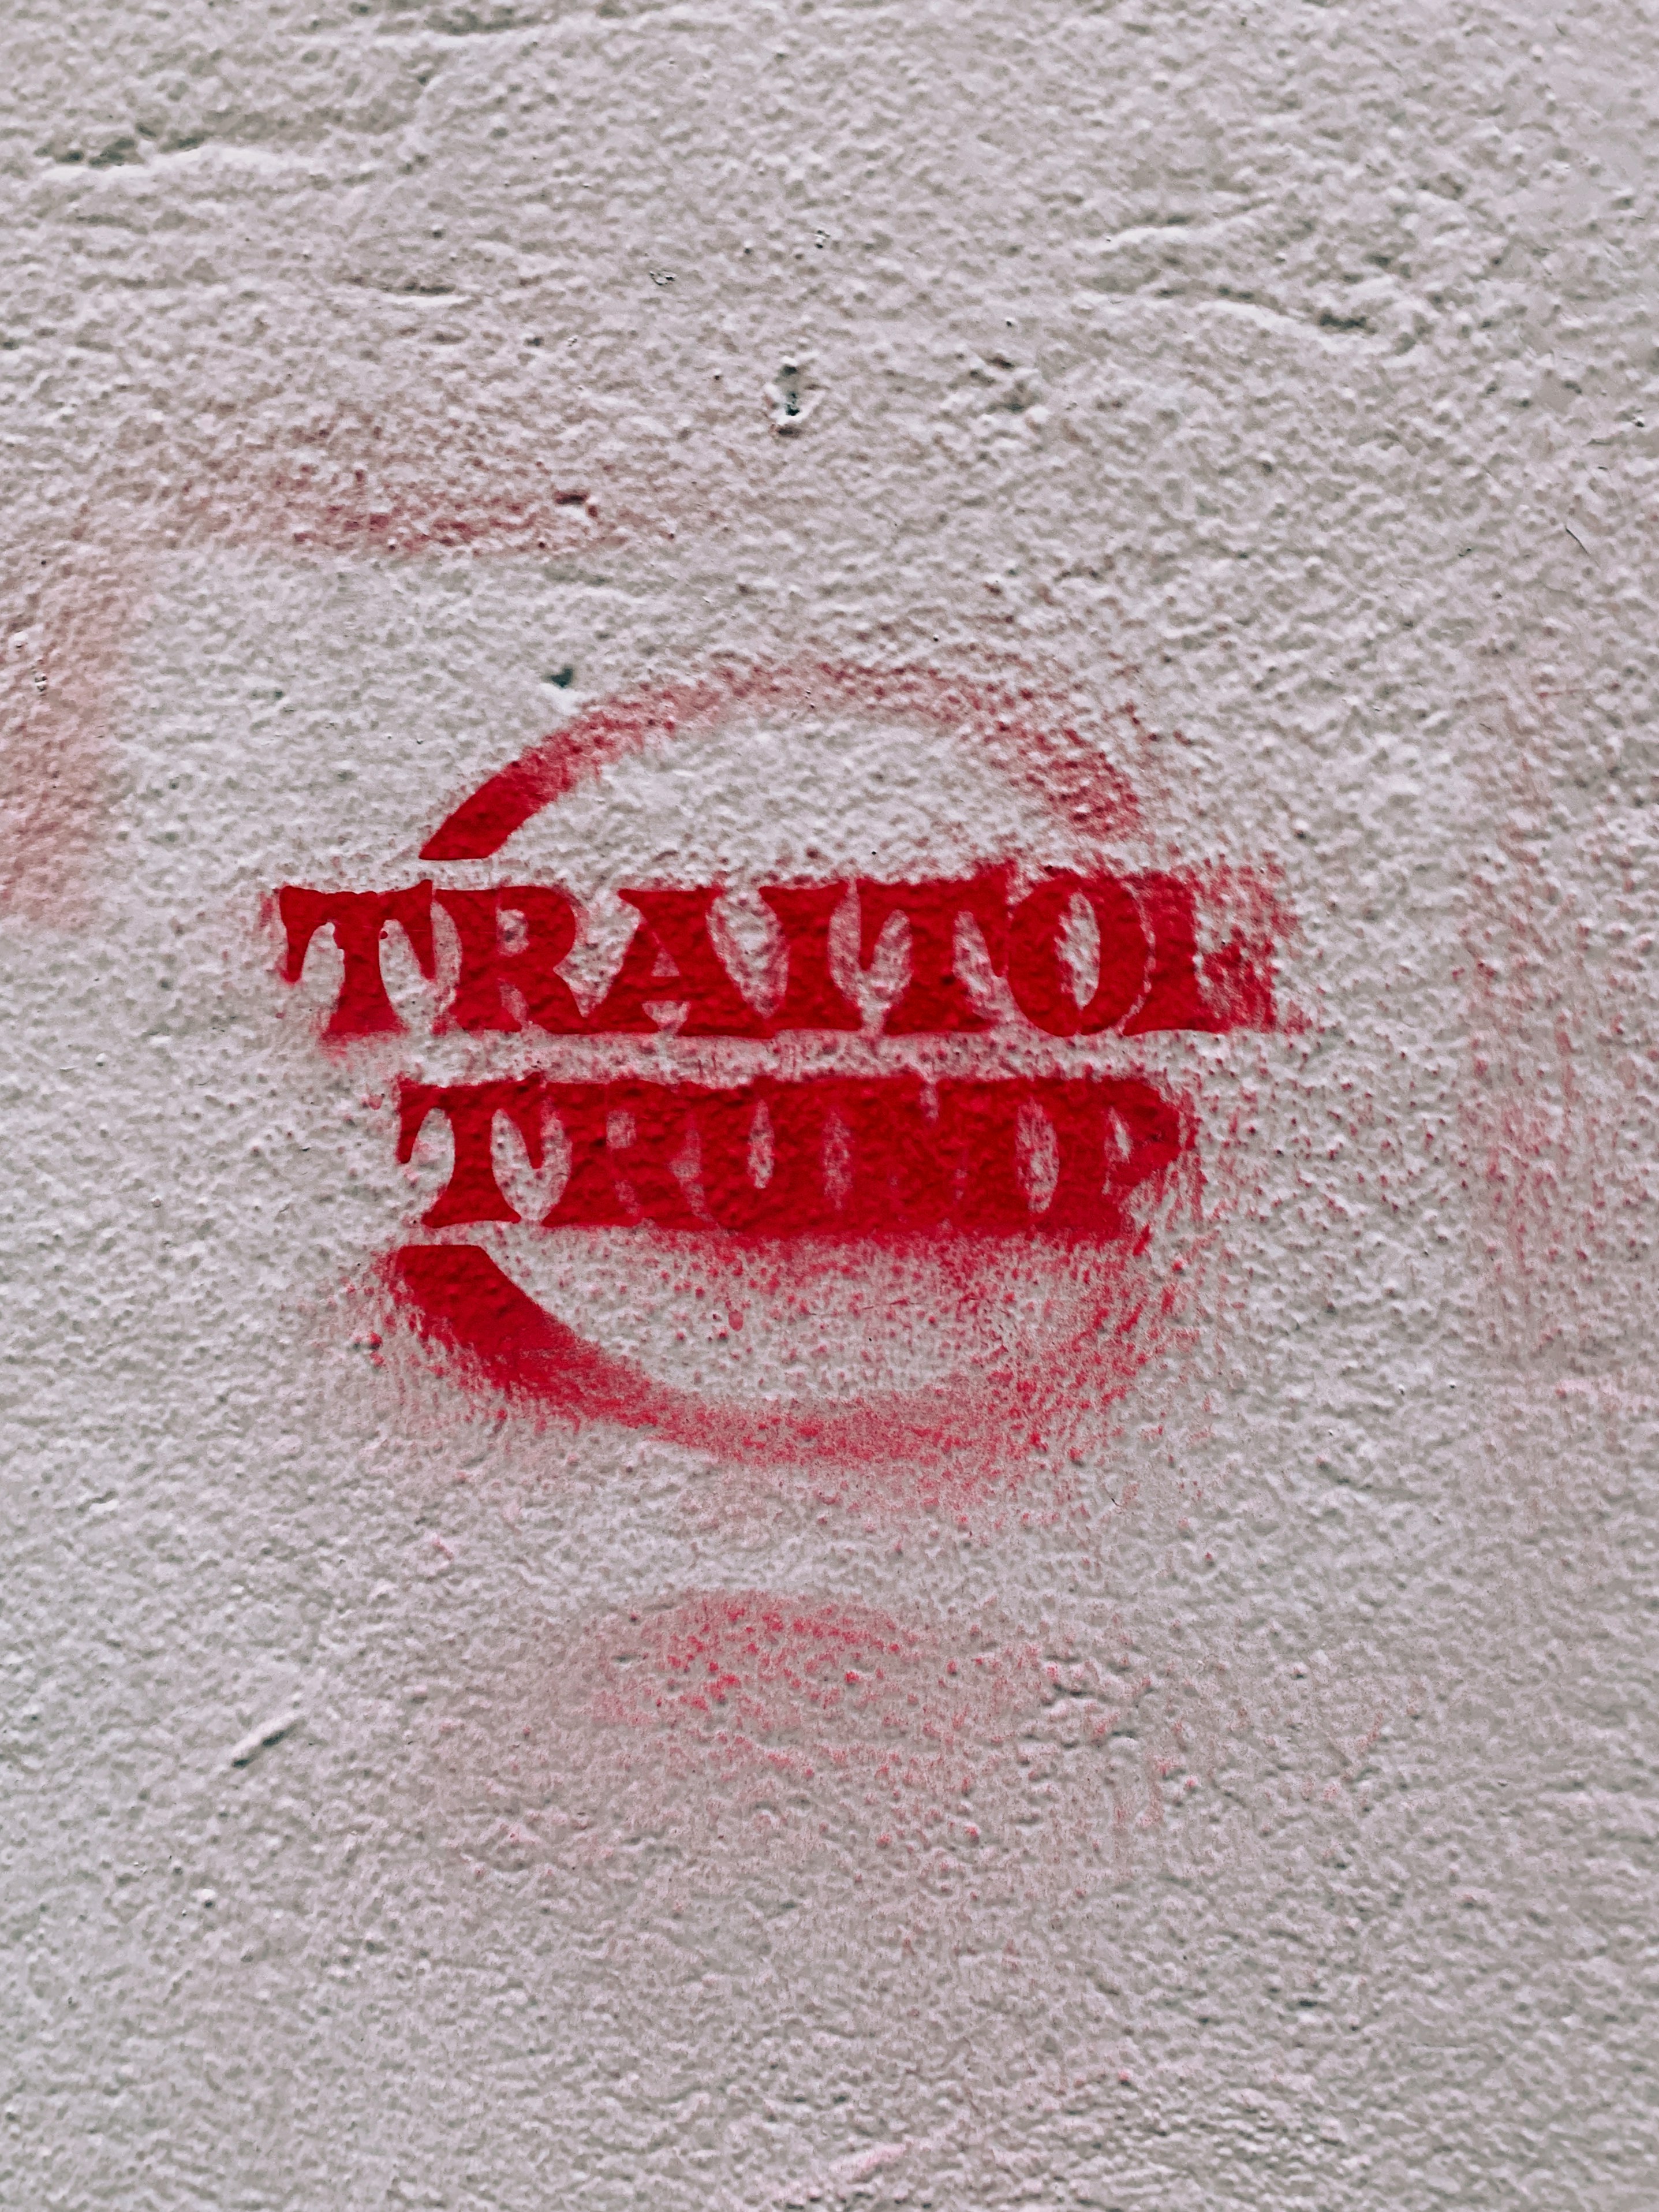 red Traitol Trump paint